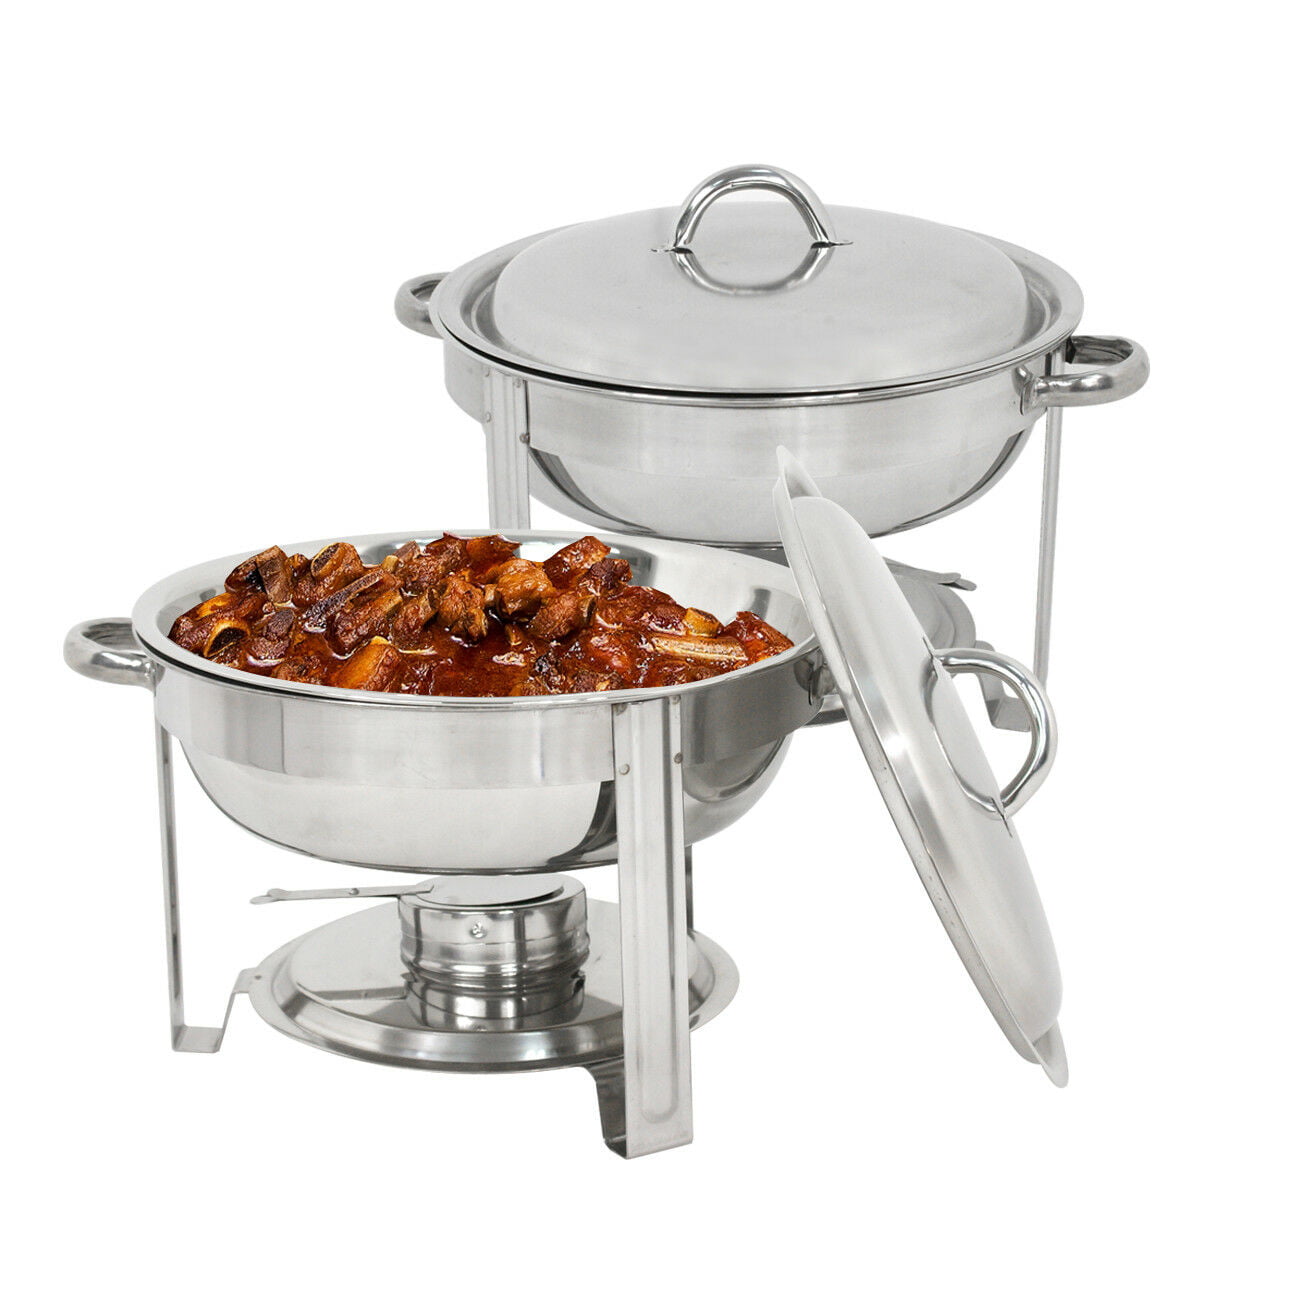 Catering Stainless Steel Chafer Round 4 Pack Buffet Chafing Dish 5Qt Party Pack 